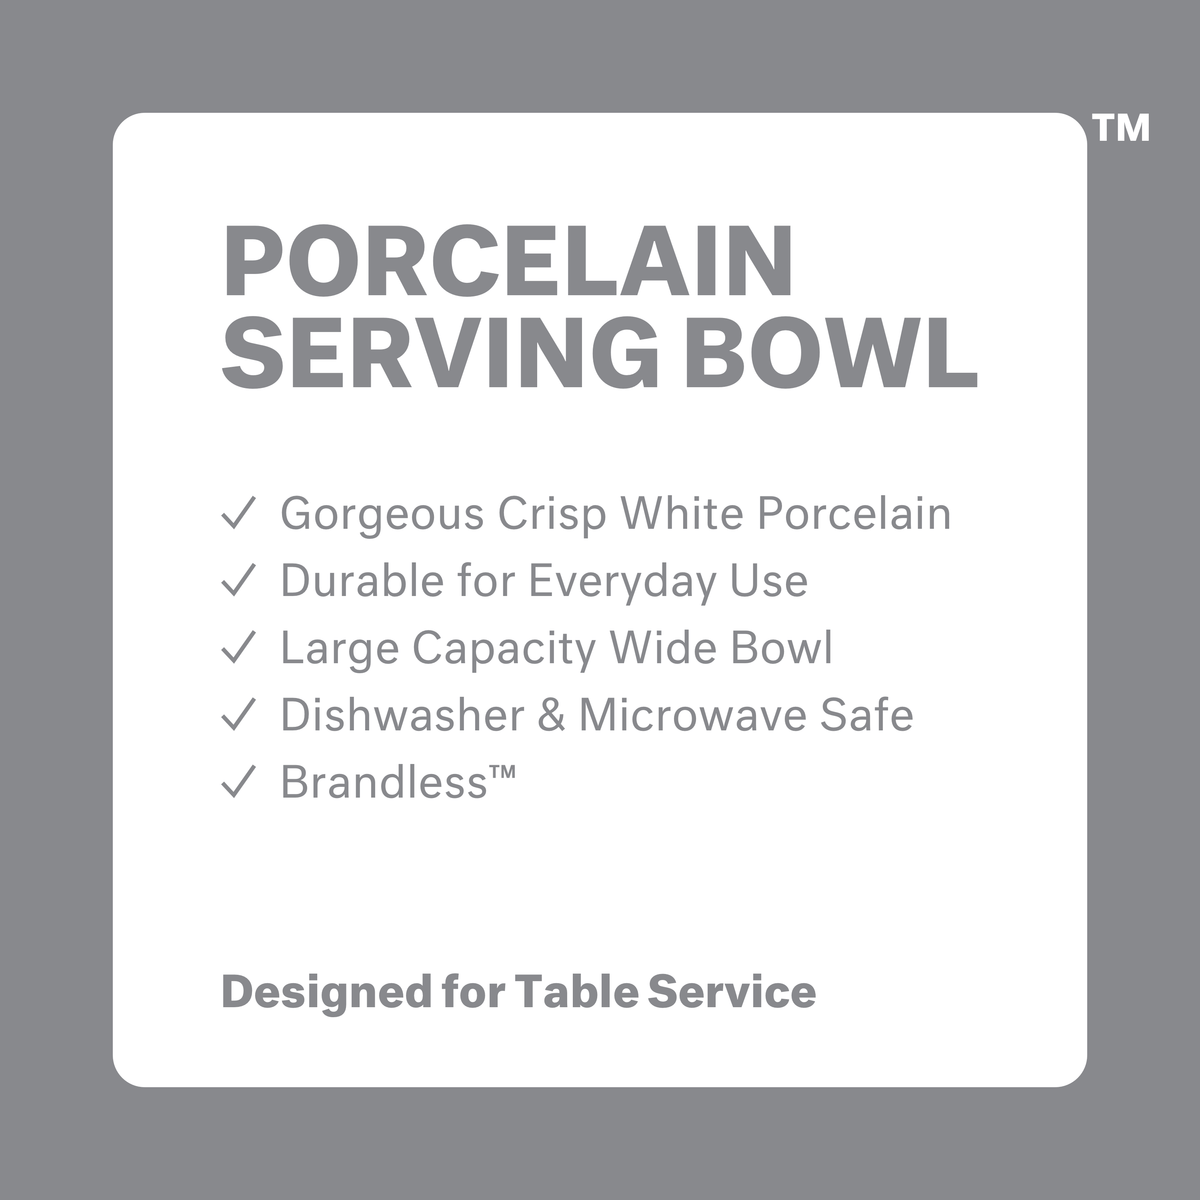 Porcelain Serving Bowl: gorgeous crisp white porcelain, durable for everyday use, large capacity wide bowl, dishwasher and microwave safe, Brandless. Designed for table service.